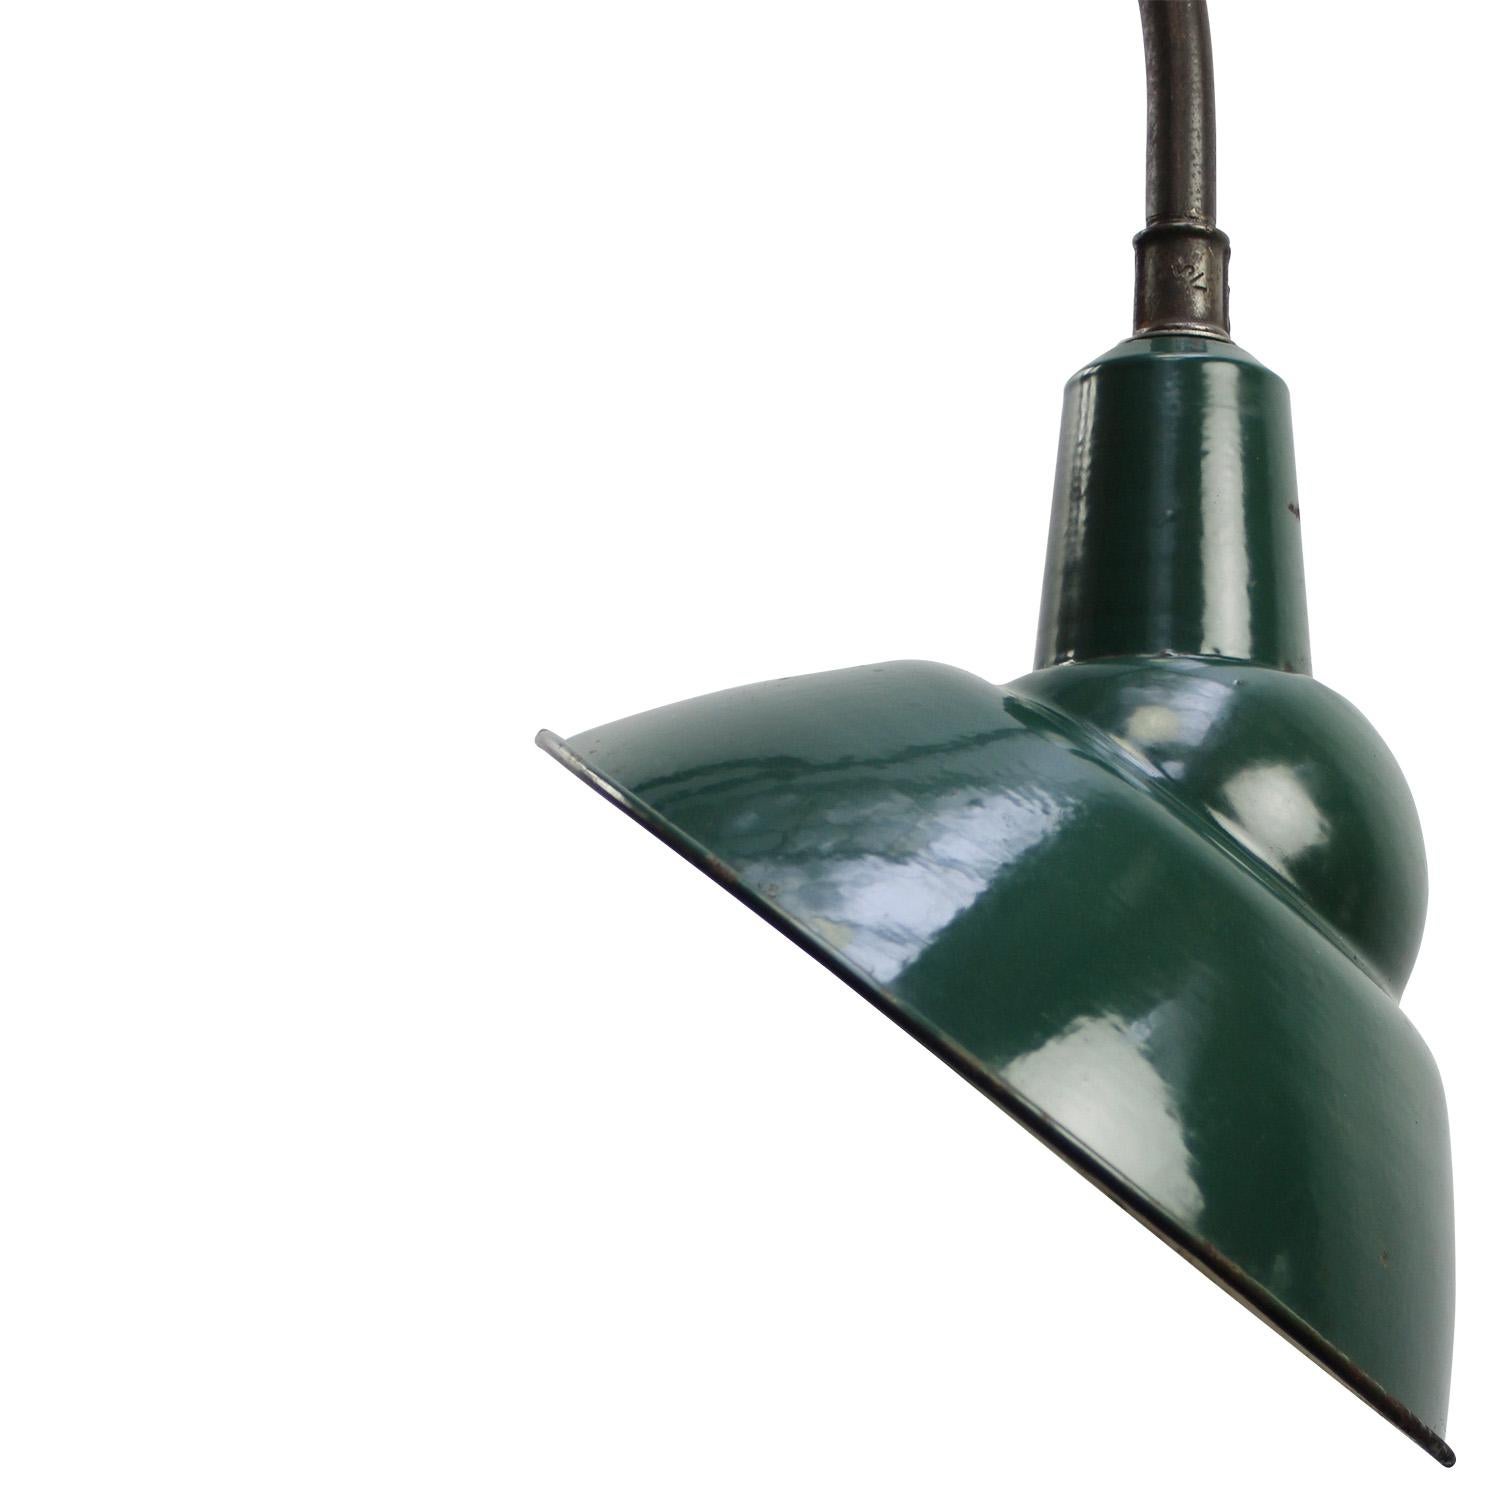 Vintage French iron street light by Sammode, France
Metal with petrol green enamel shade

Size wall mount 30 × 3 cm

Shipped in parts, easy to assemble

Weight: 3.00 kg / 6.6 lb

Priced per individual item. All lamps have been made suitable by